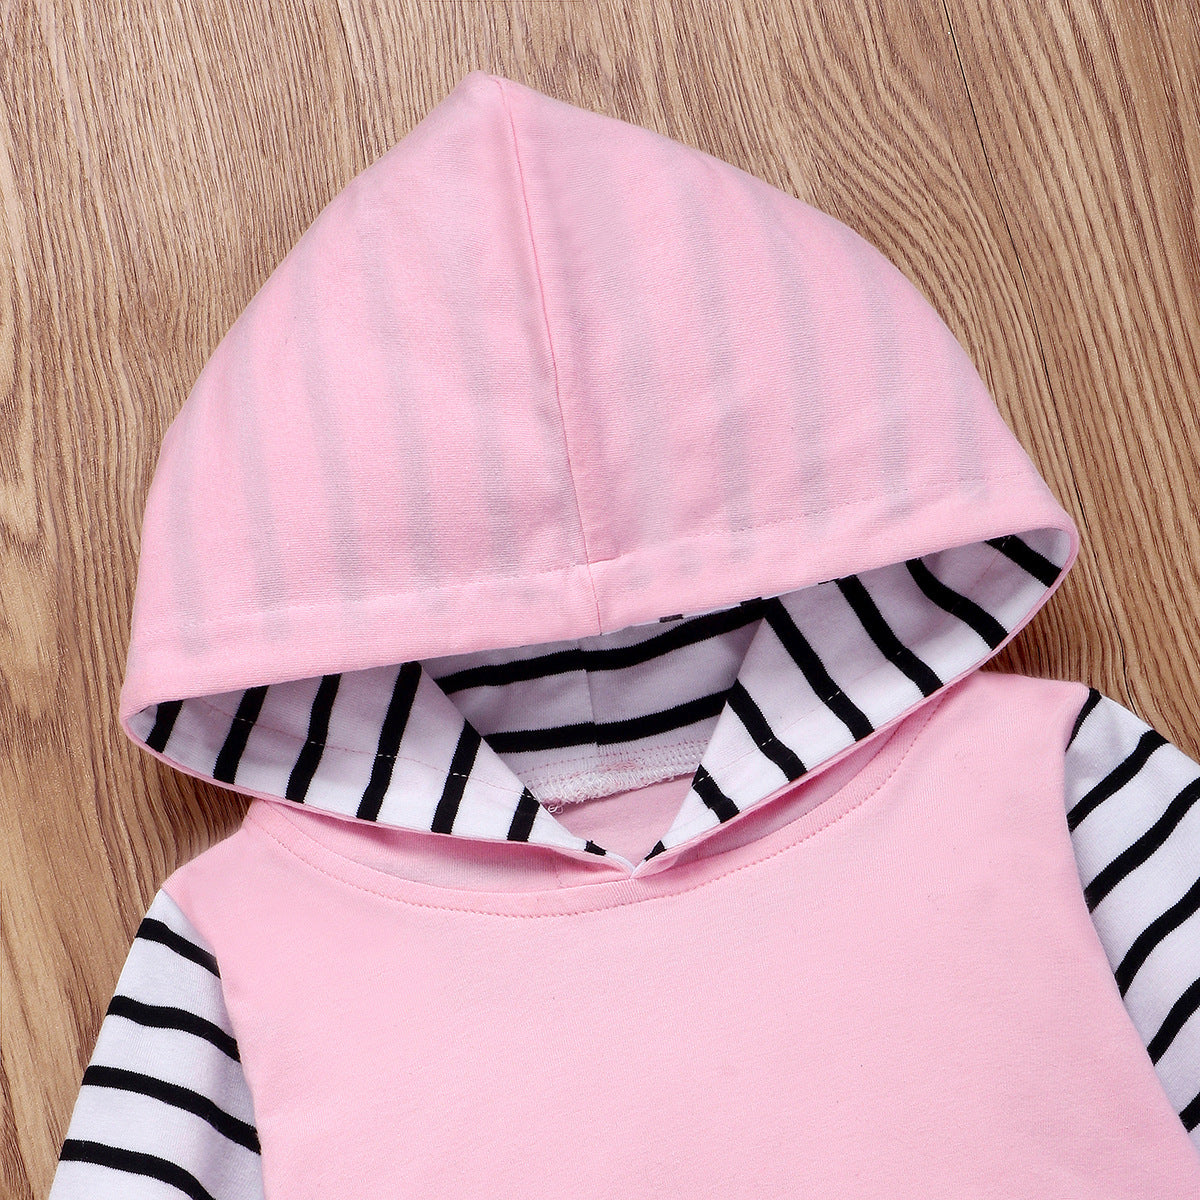 Baby Boys Girls Solid Color Striped Set 2 pcs Outfits